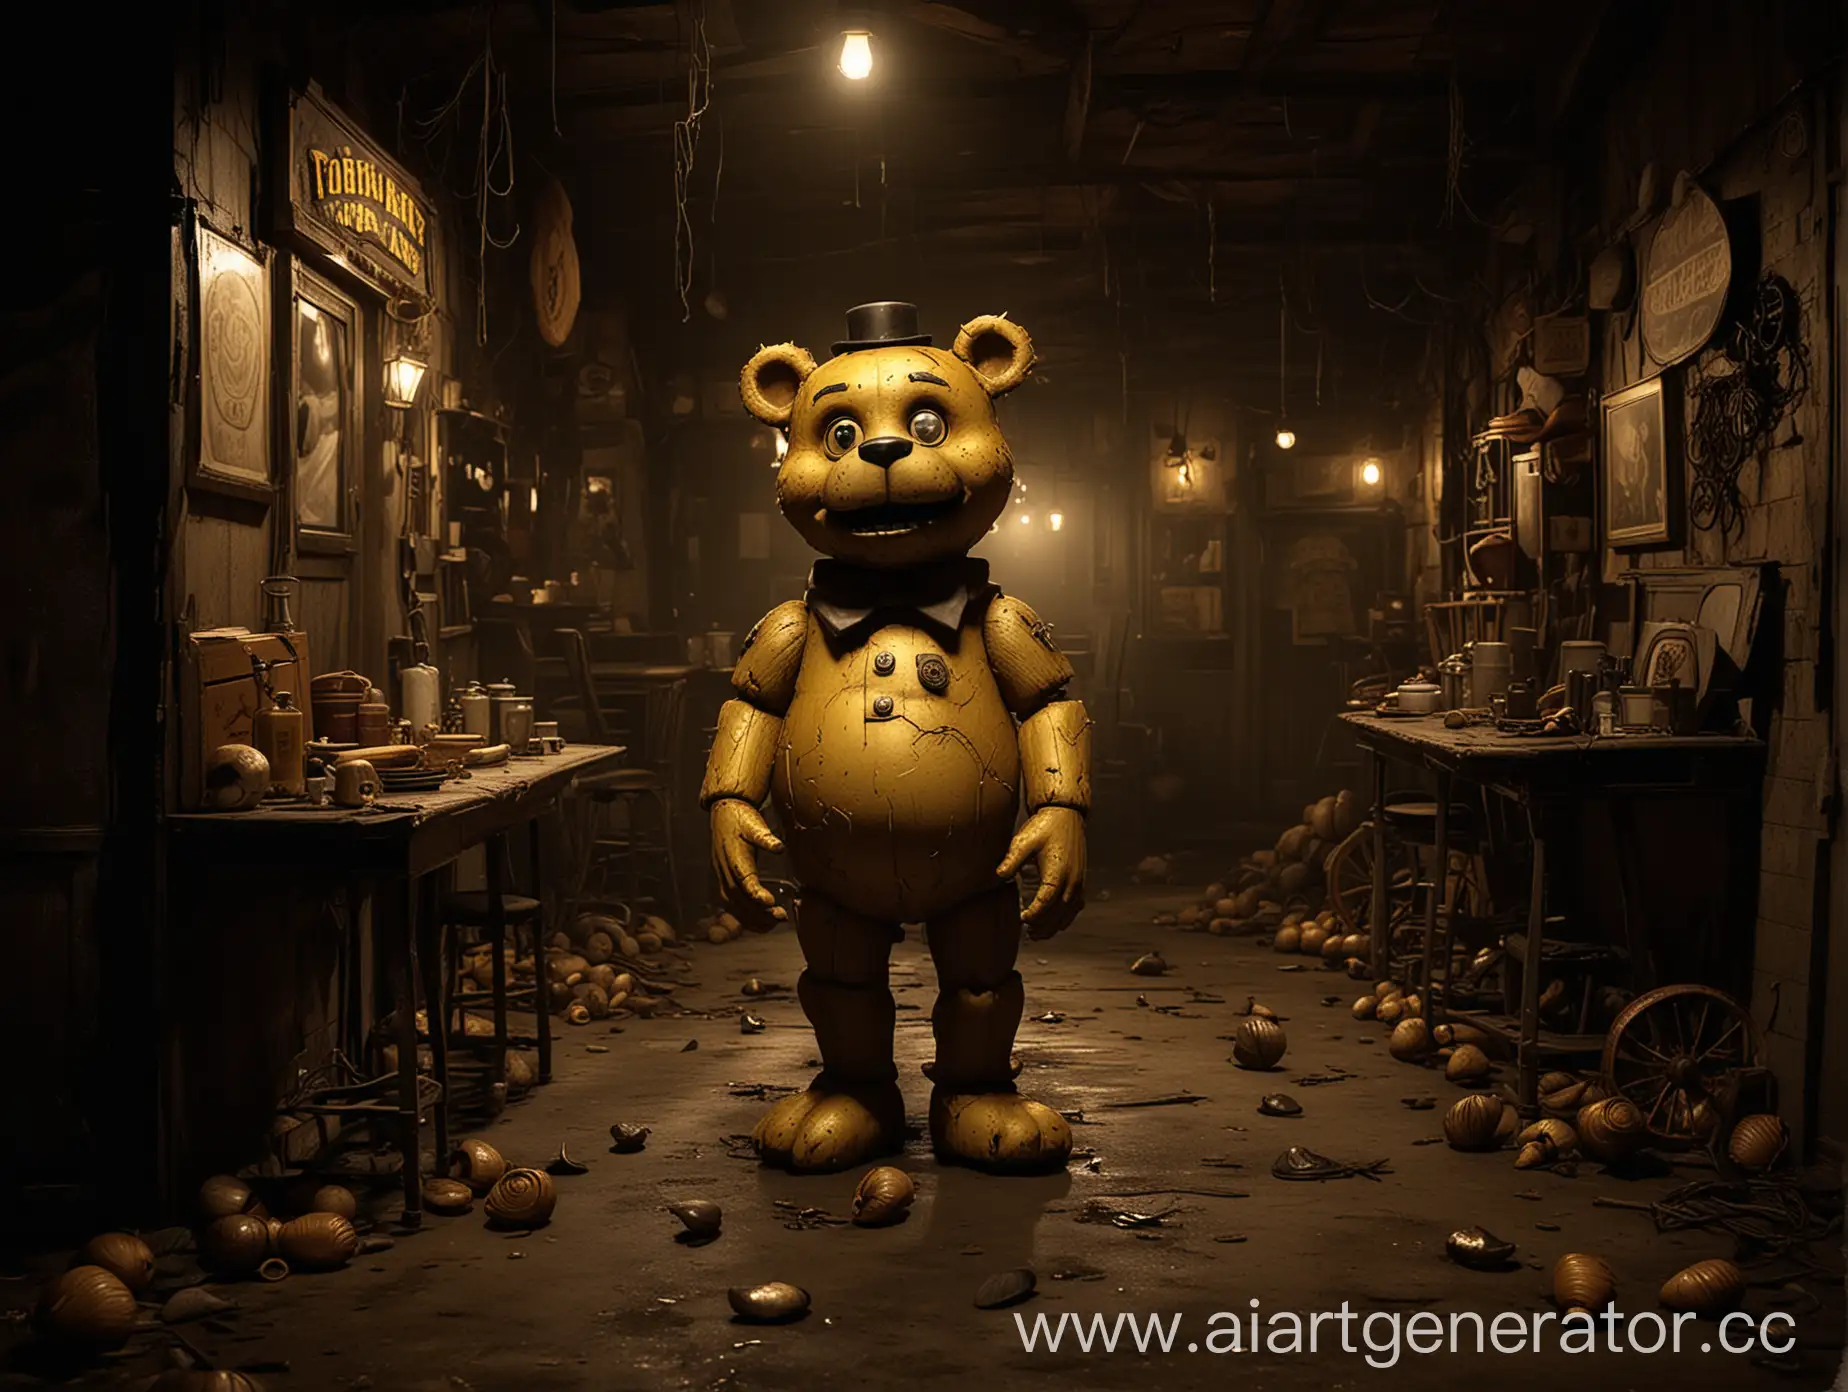 Twisted-Cabaret-Stage-with-Golden-Freddy-and-Haunting-Animatronics